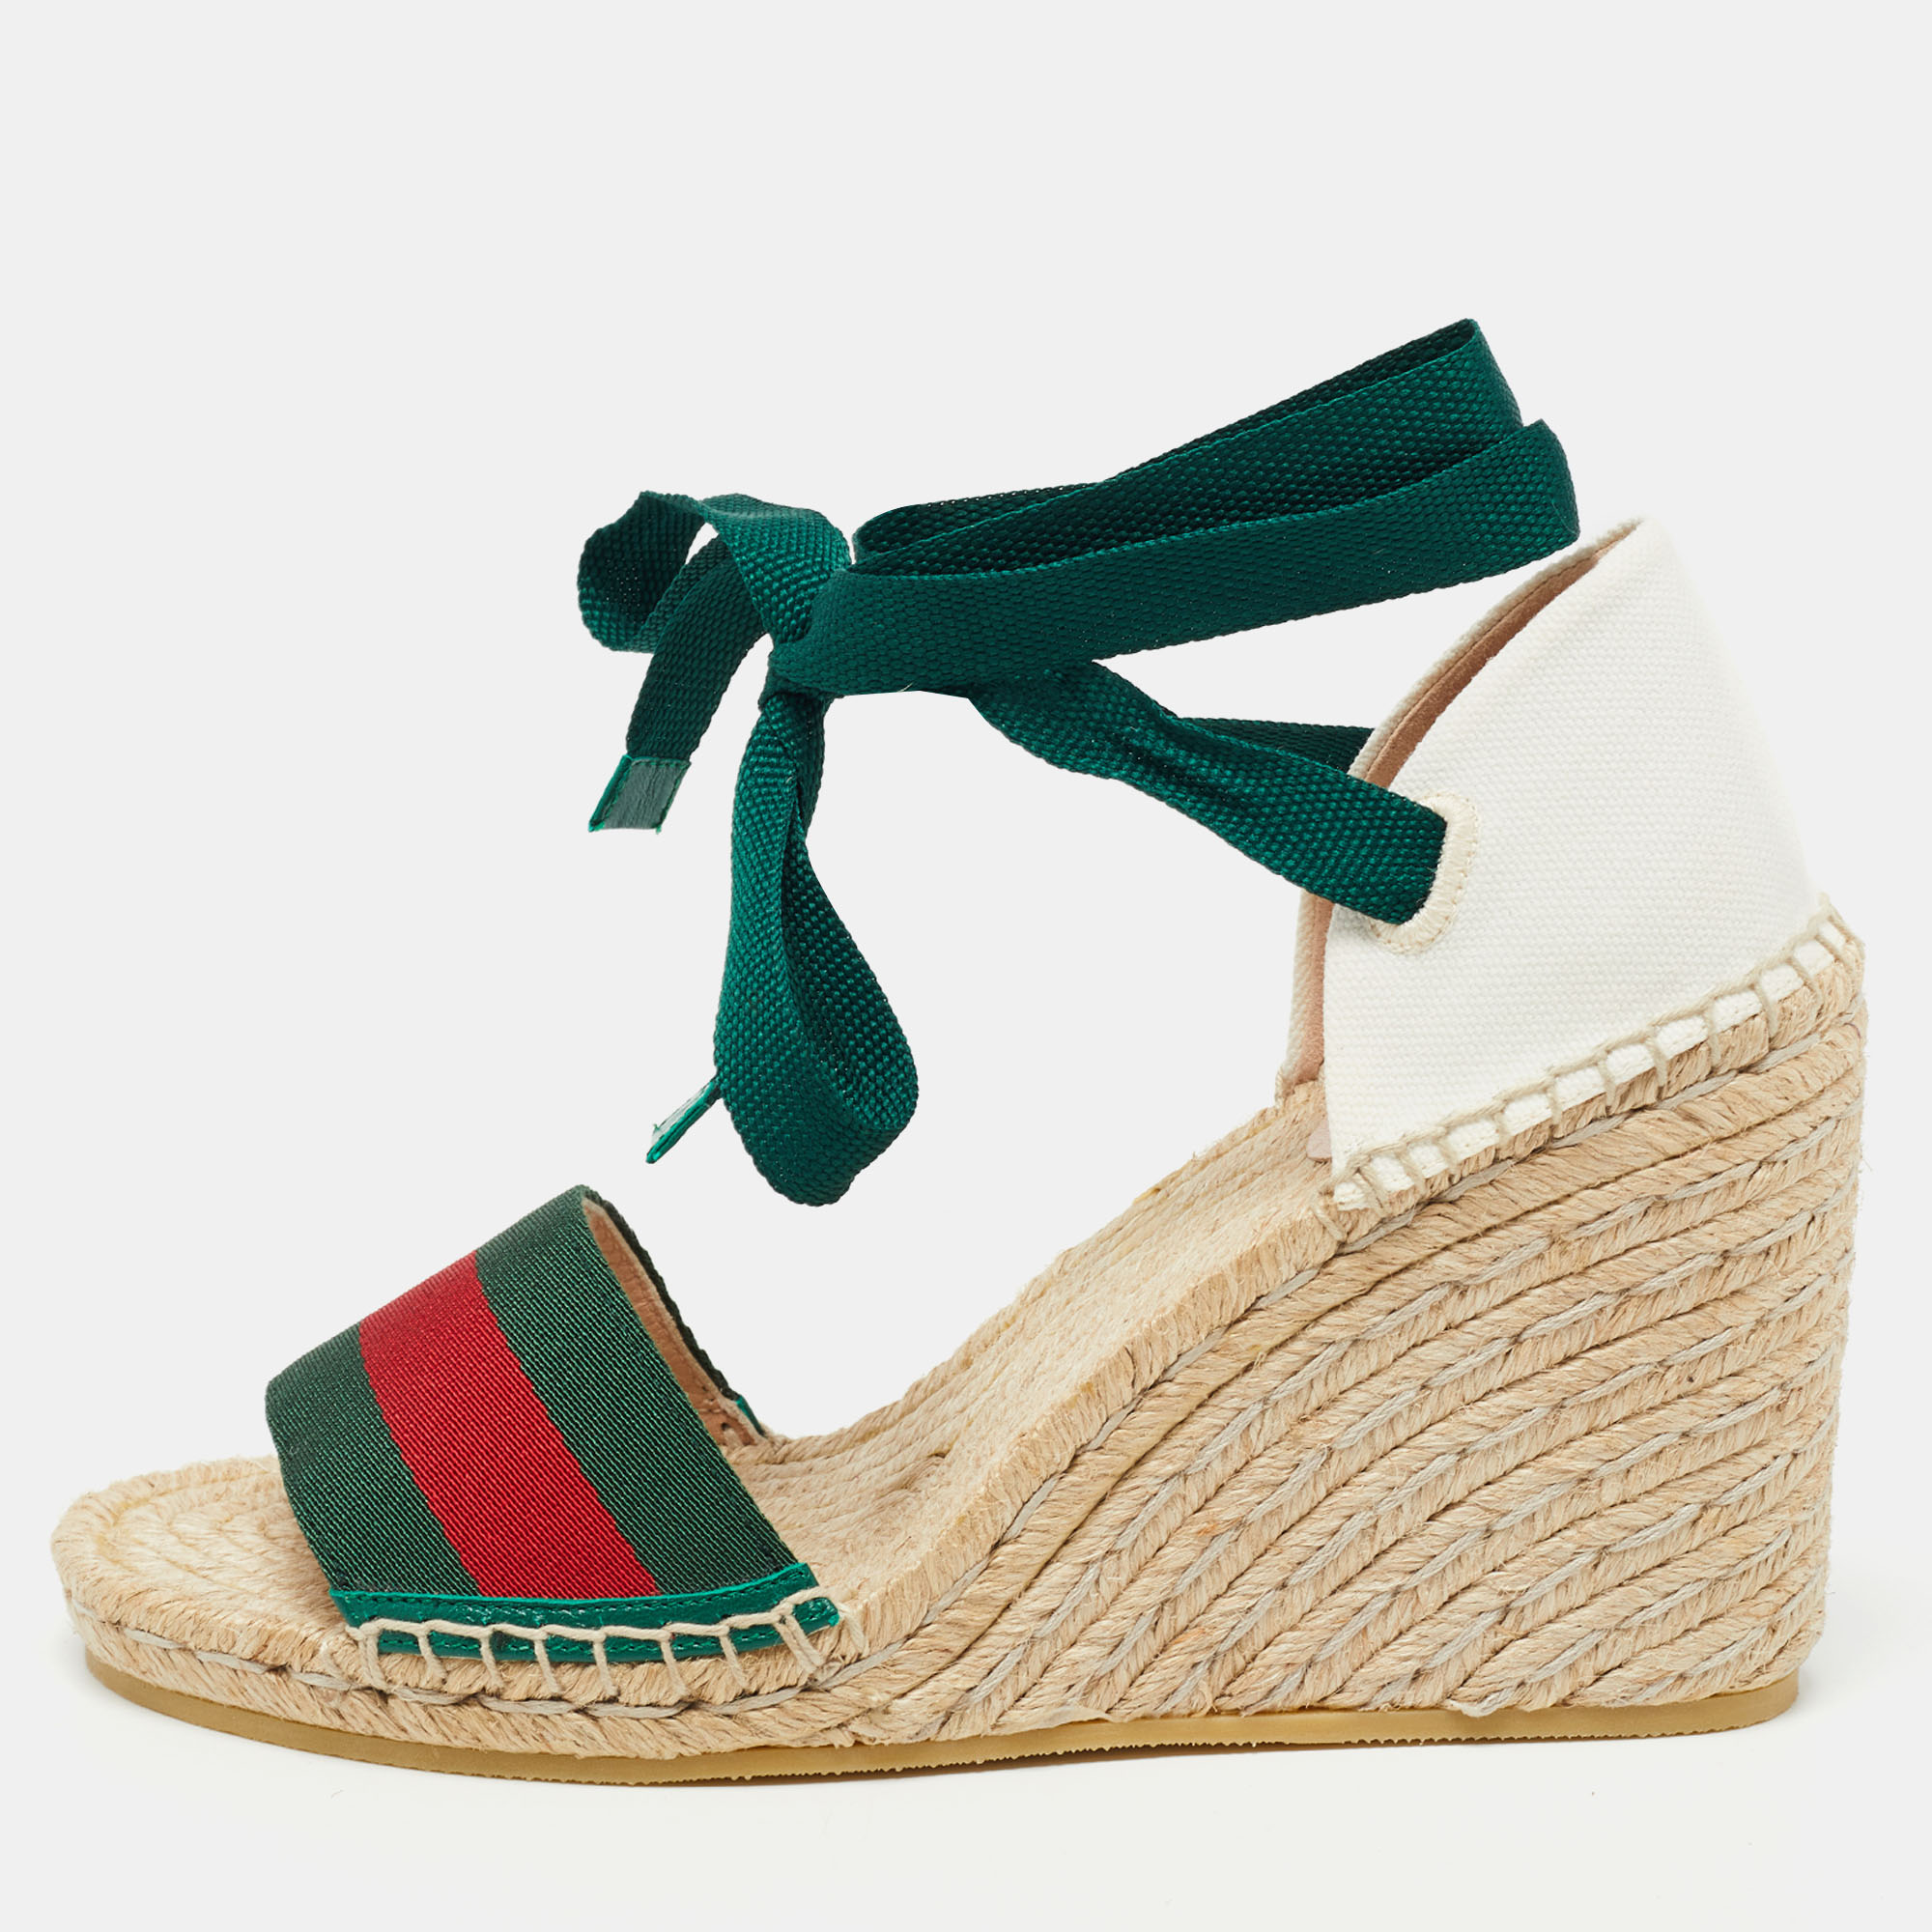 Pre-owned Gucci Multicolor Canvas Web Espadrille Wedge Ankle Wrap Sandals Size 38